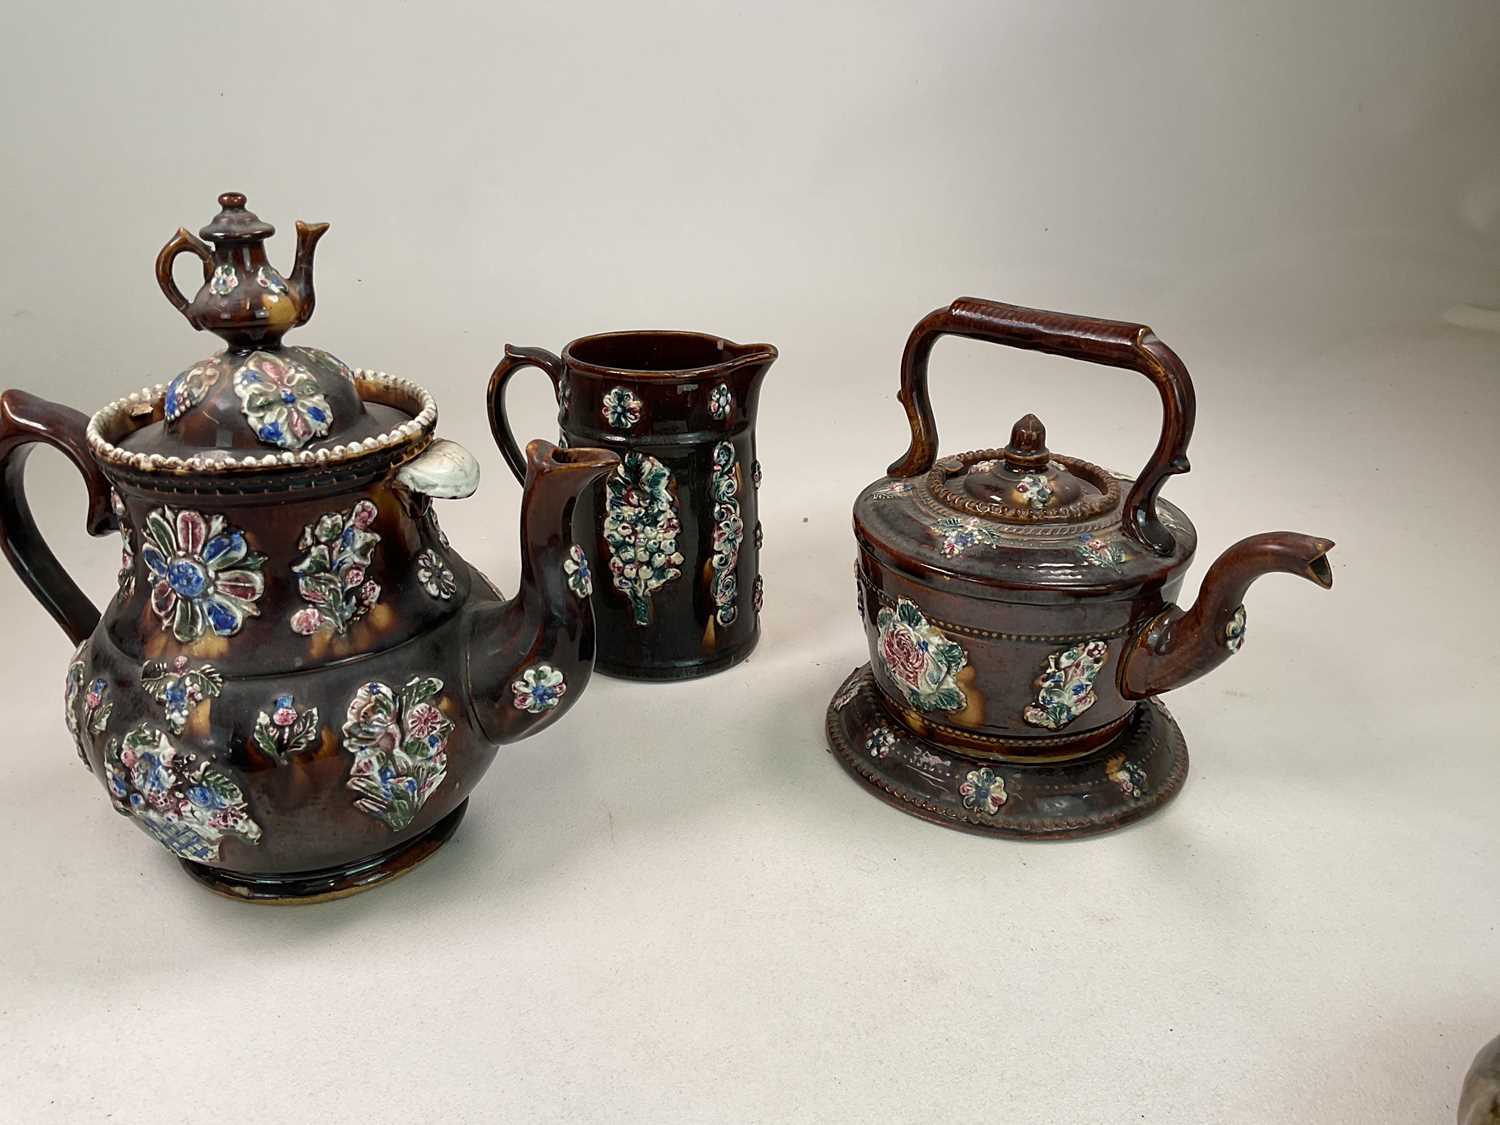 BARGEWARE; a glazed teapot, kettle on stand and jug of large proportions, height of teapot 32cm. - Image 2 of 3